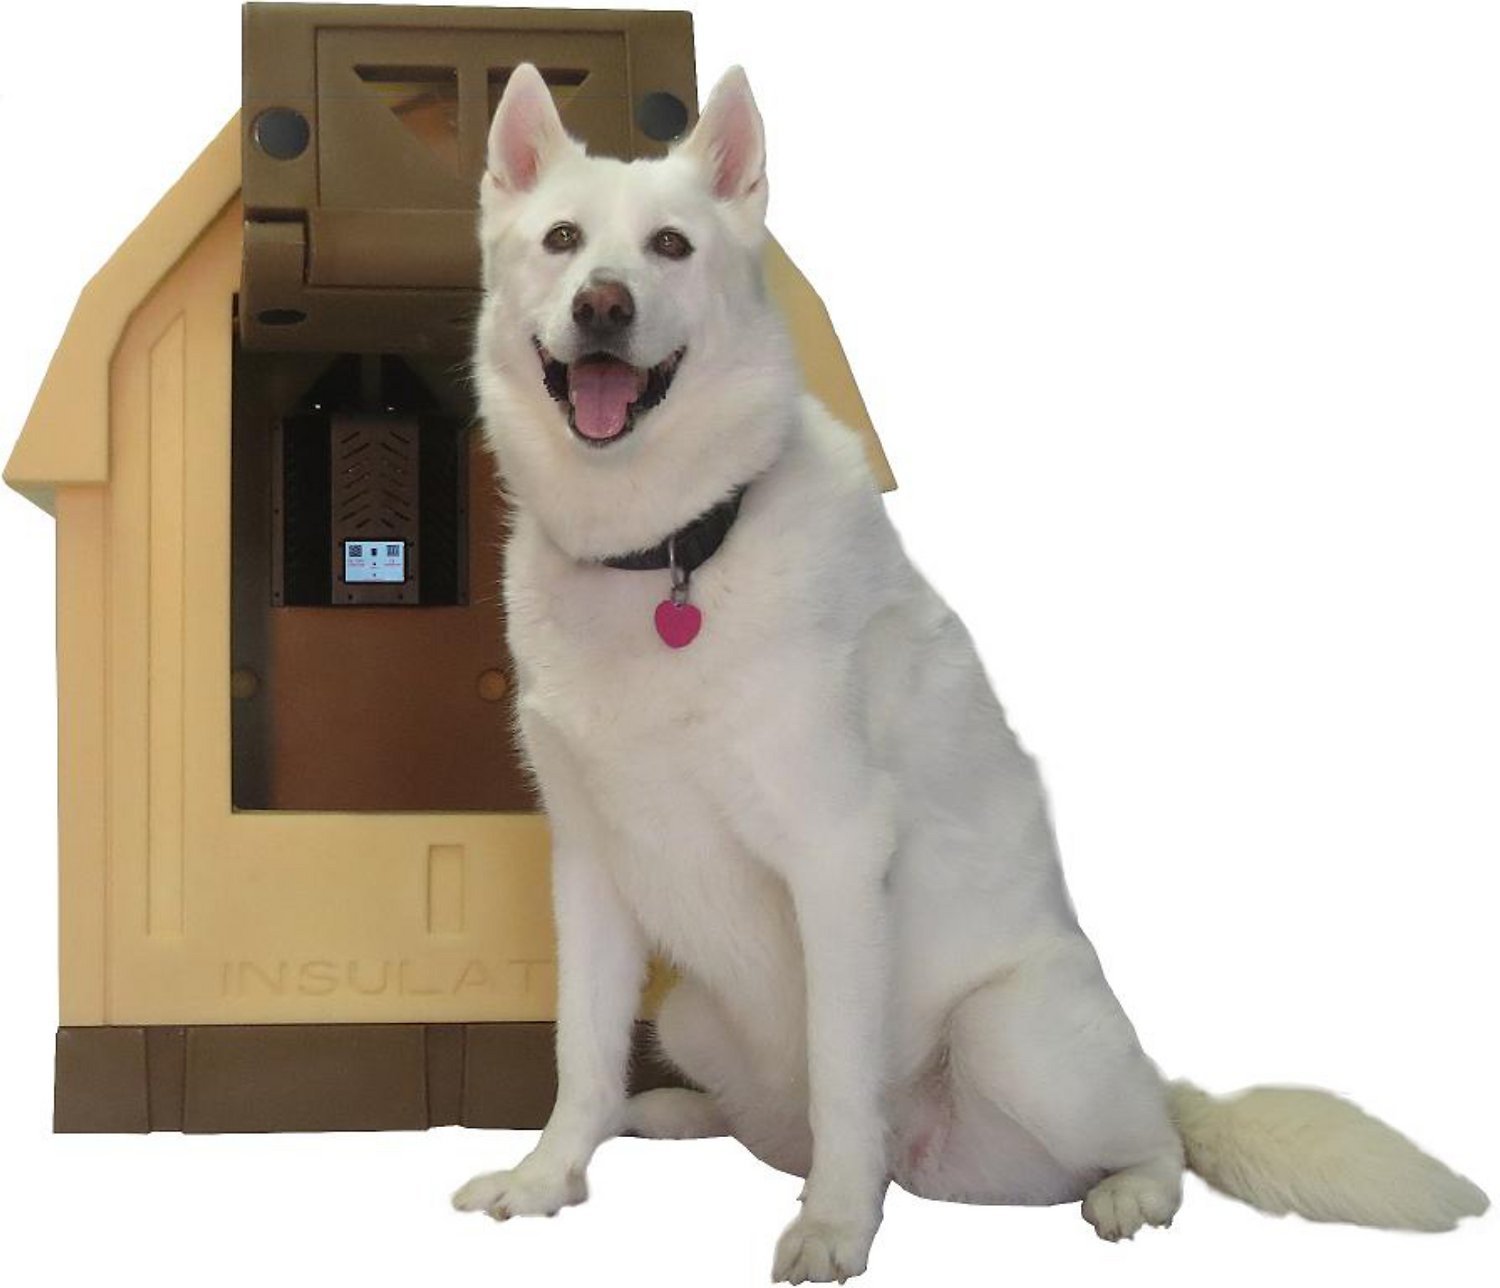 Dog sitting in front of heated dog house